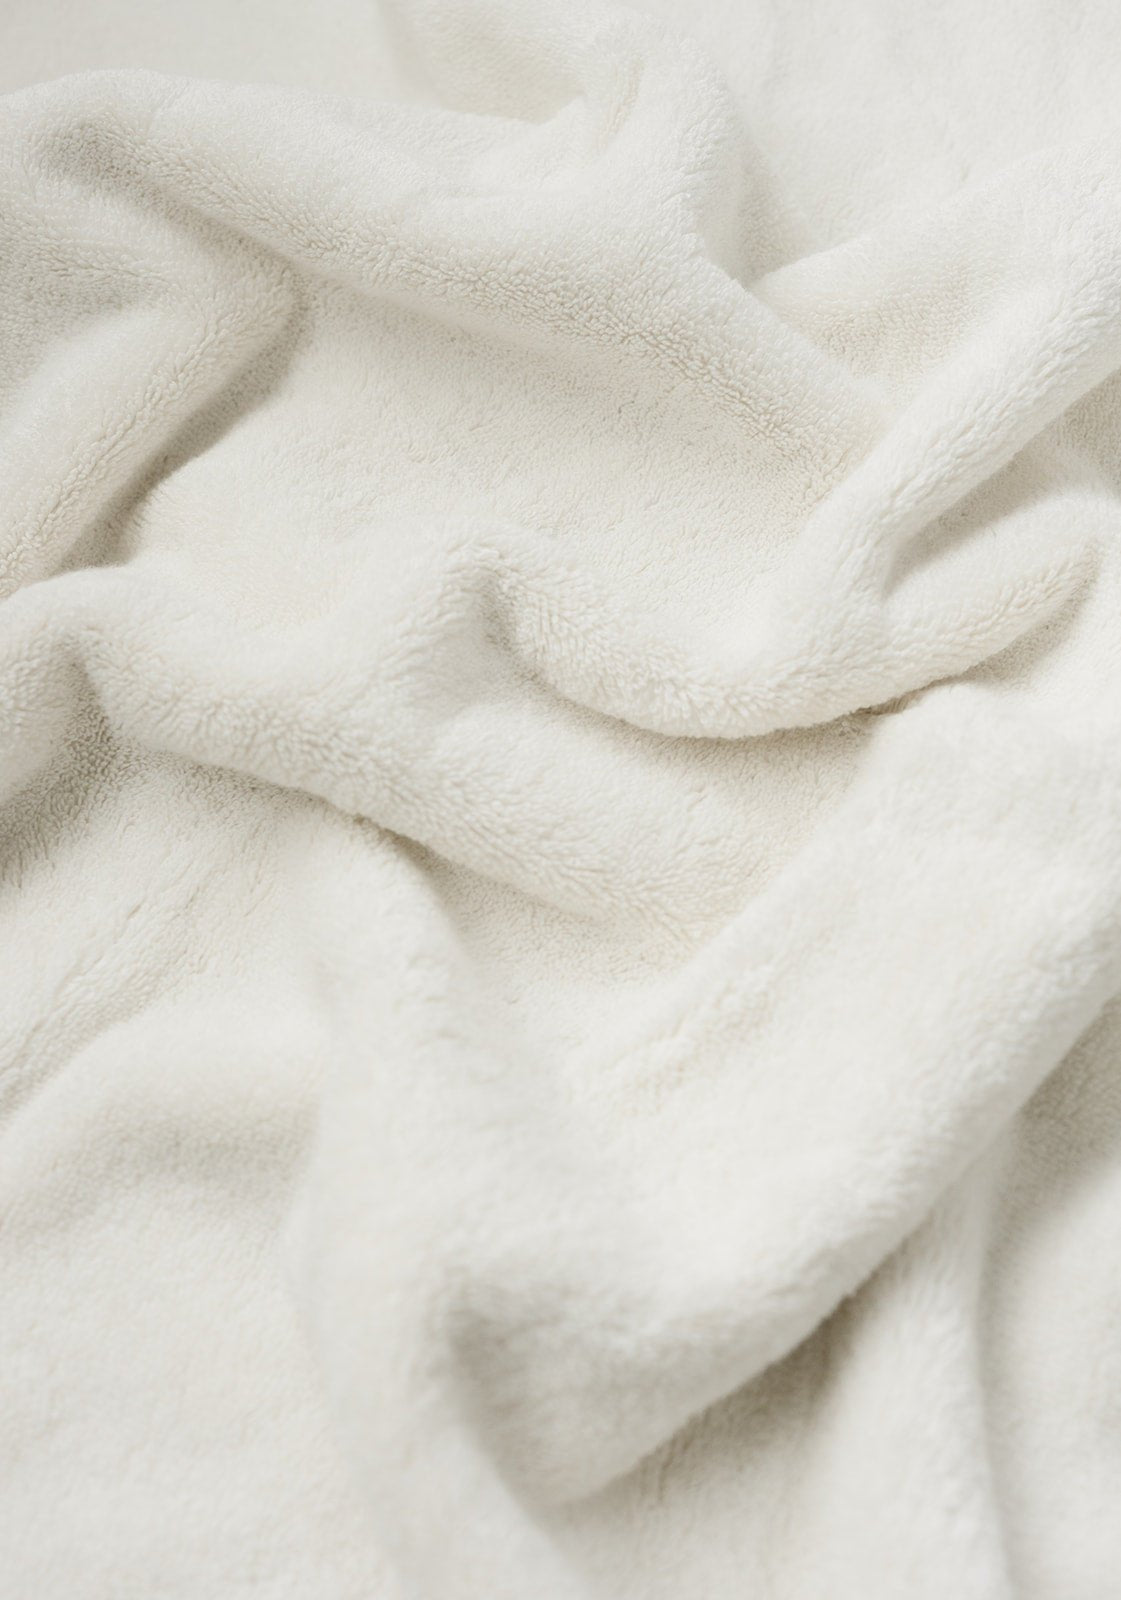 Premium Plush Bath Towel in the color Seashell. Photo of Seashell Premium Plush Bath Towel taken as a close up only showing the Premium Plush Bath Towel's texture 